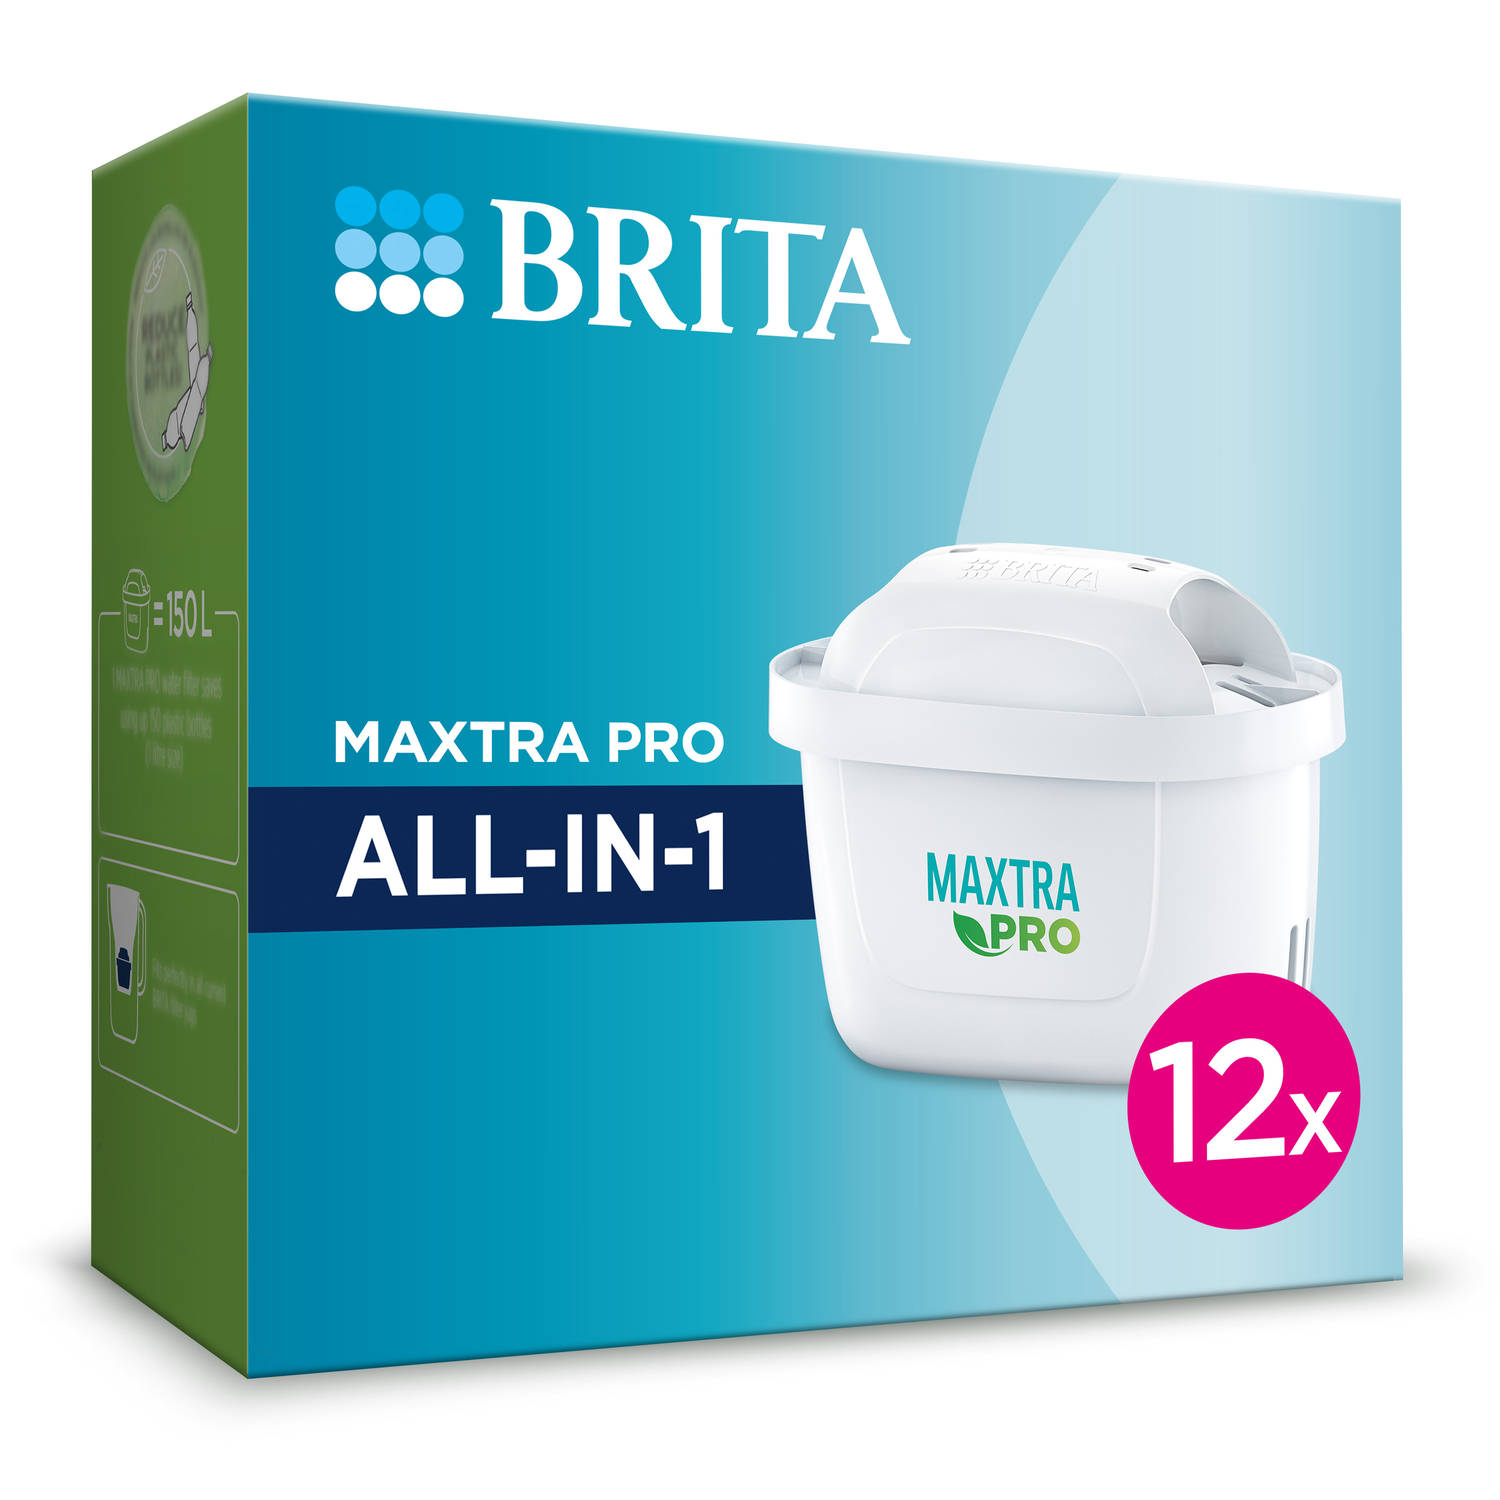 Brita Waterfilterpatroon Maxtra Pro All-in-1 12 Pack